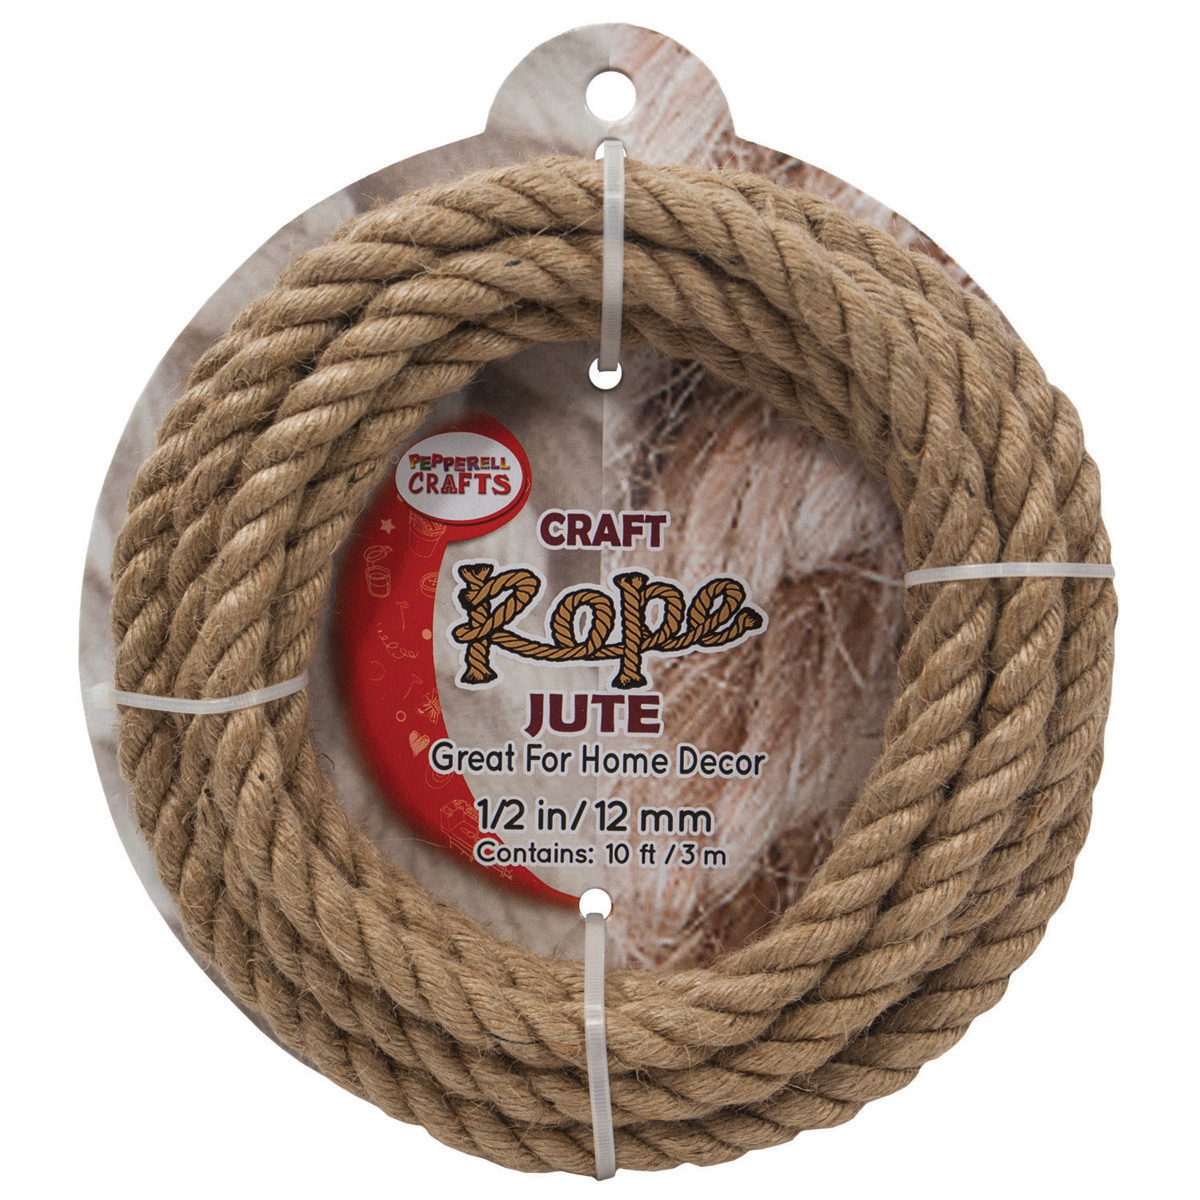 Pepperell Jute Craft Rope .5X10' Natural